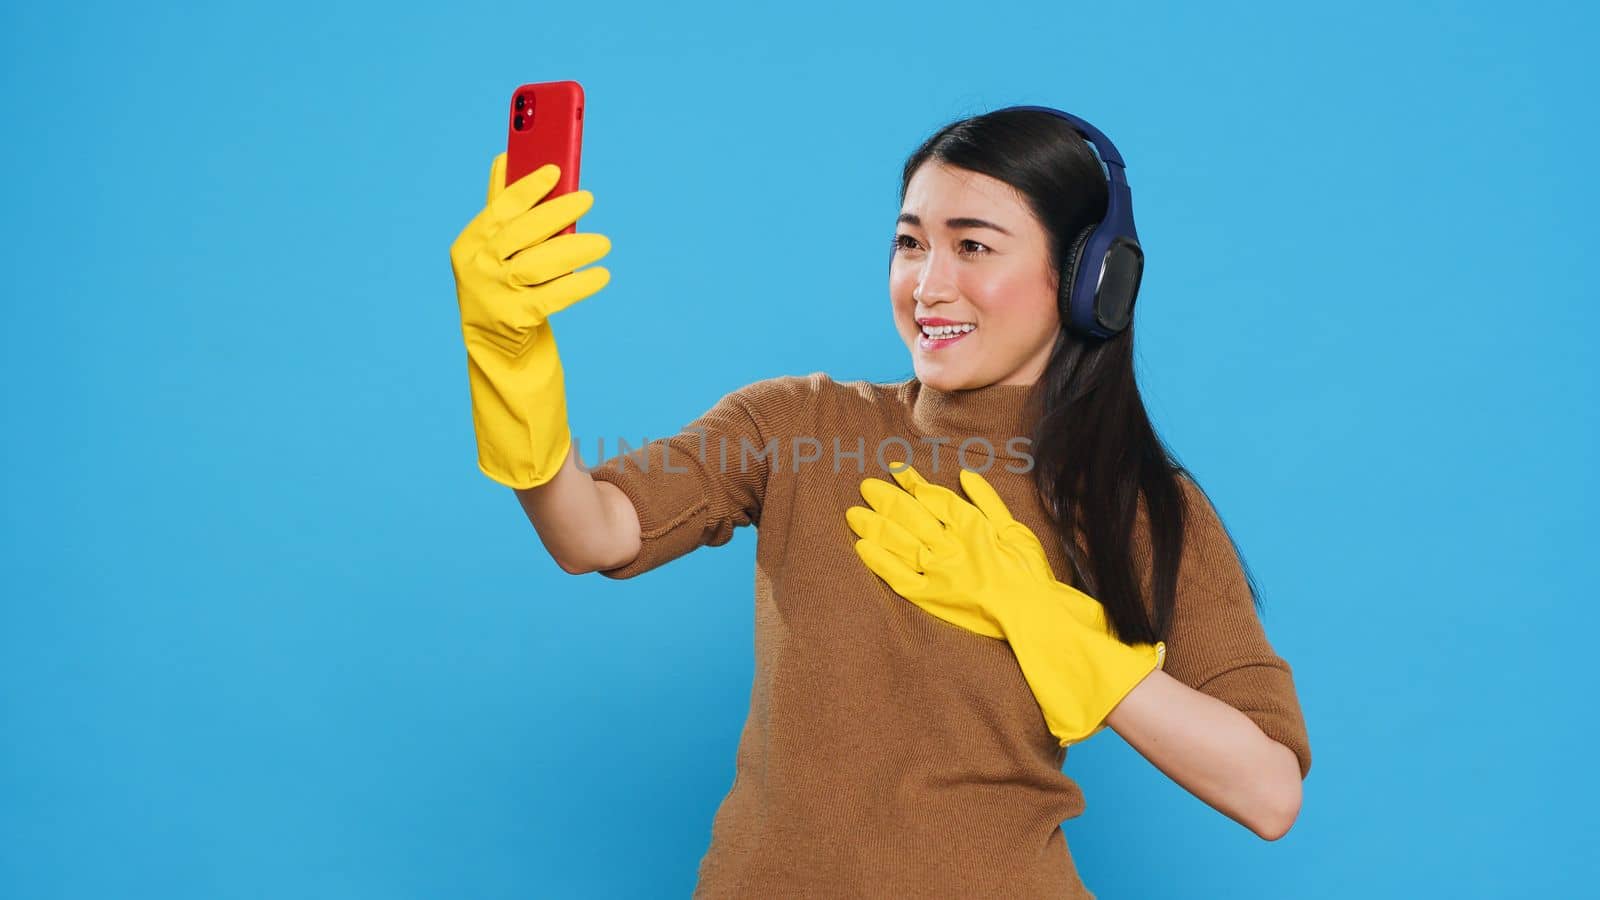 Smiling asian maid wearing headphone while talking with remote friend during videocall meeting on phone, standing in studio over blue background. Housekeeper doing house cleaning using chemical spray